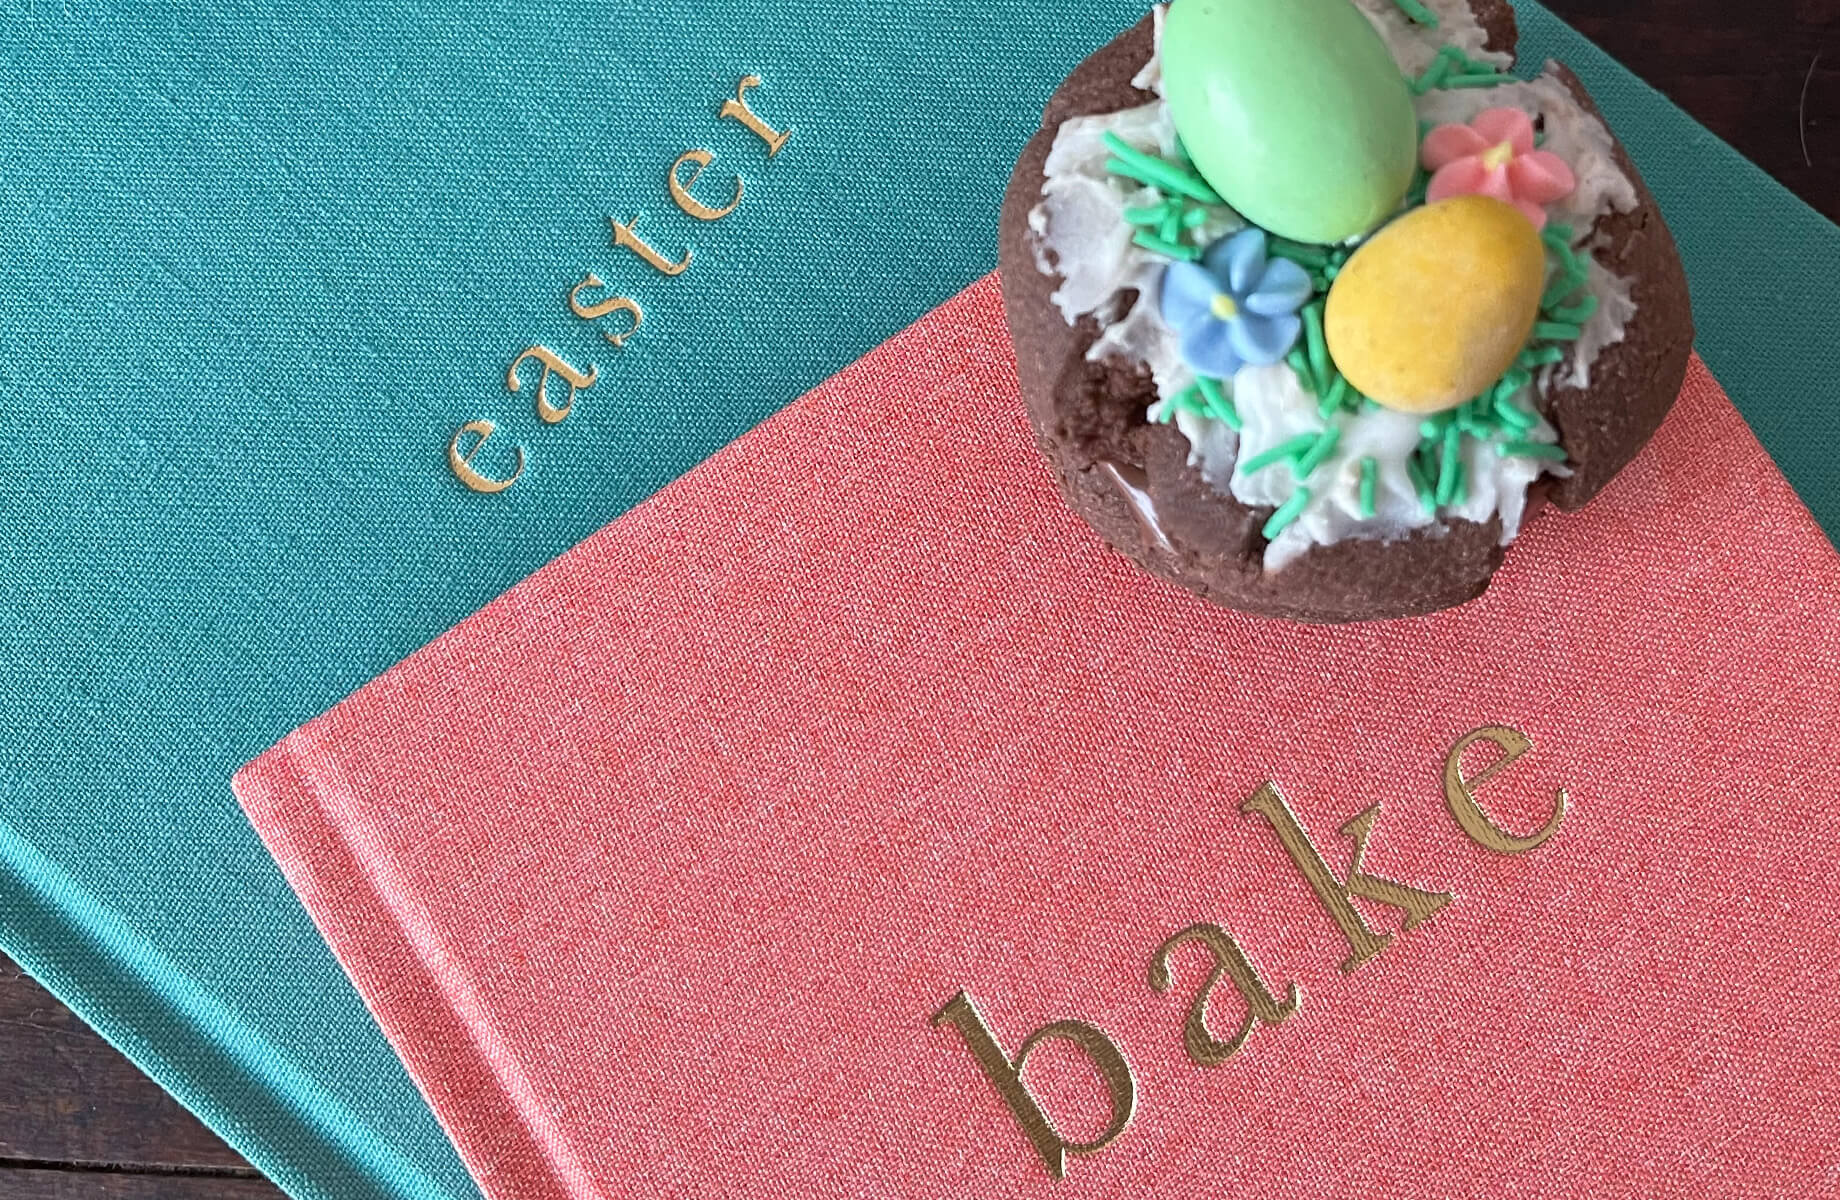 EASTER BAKING YOUR BUNNIES WILL LOVE!